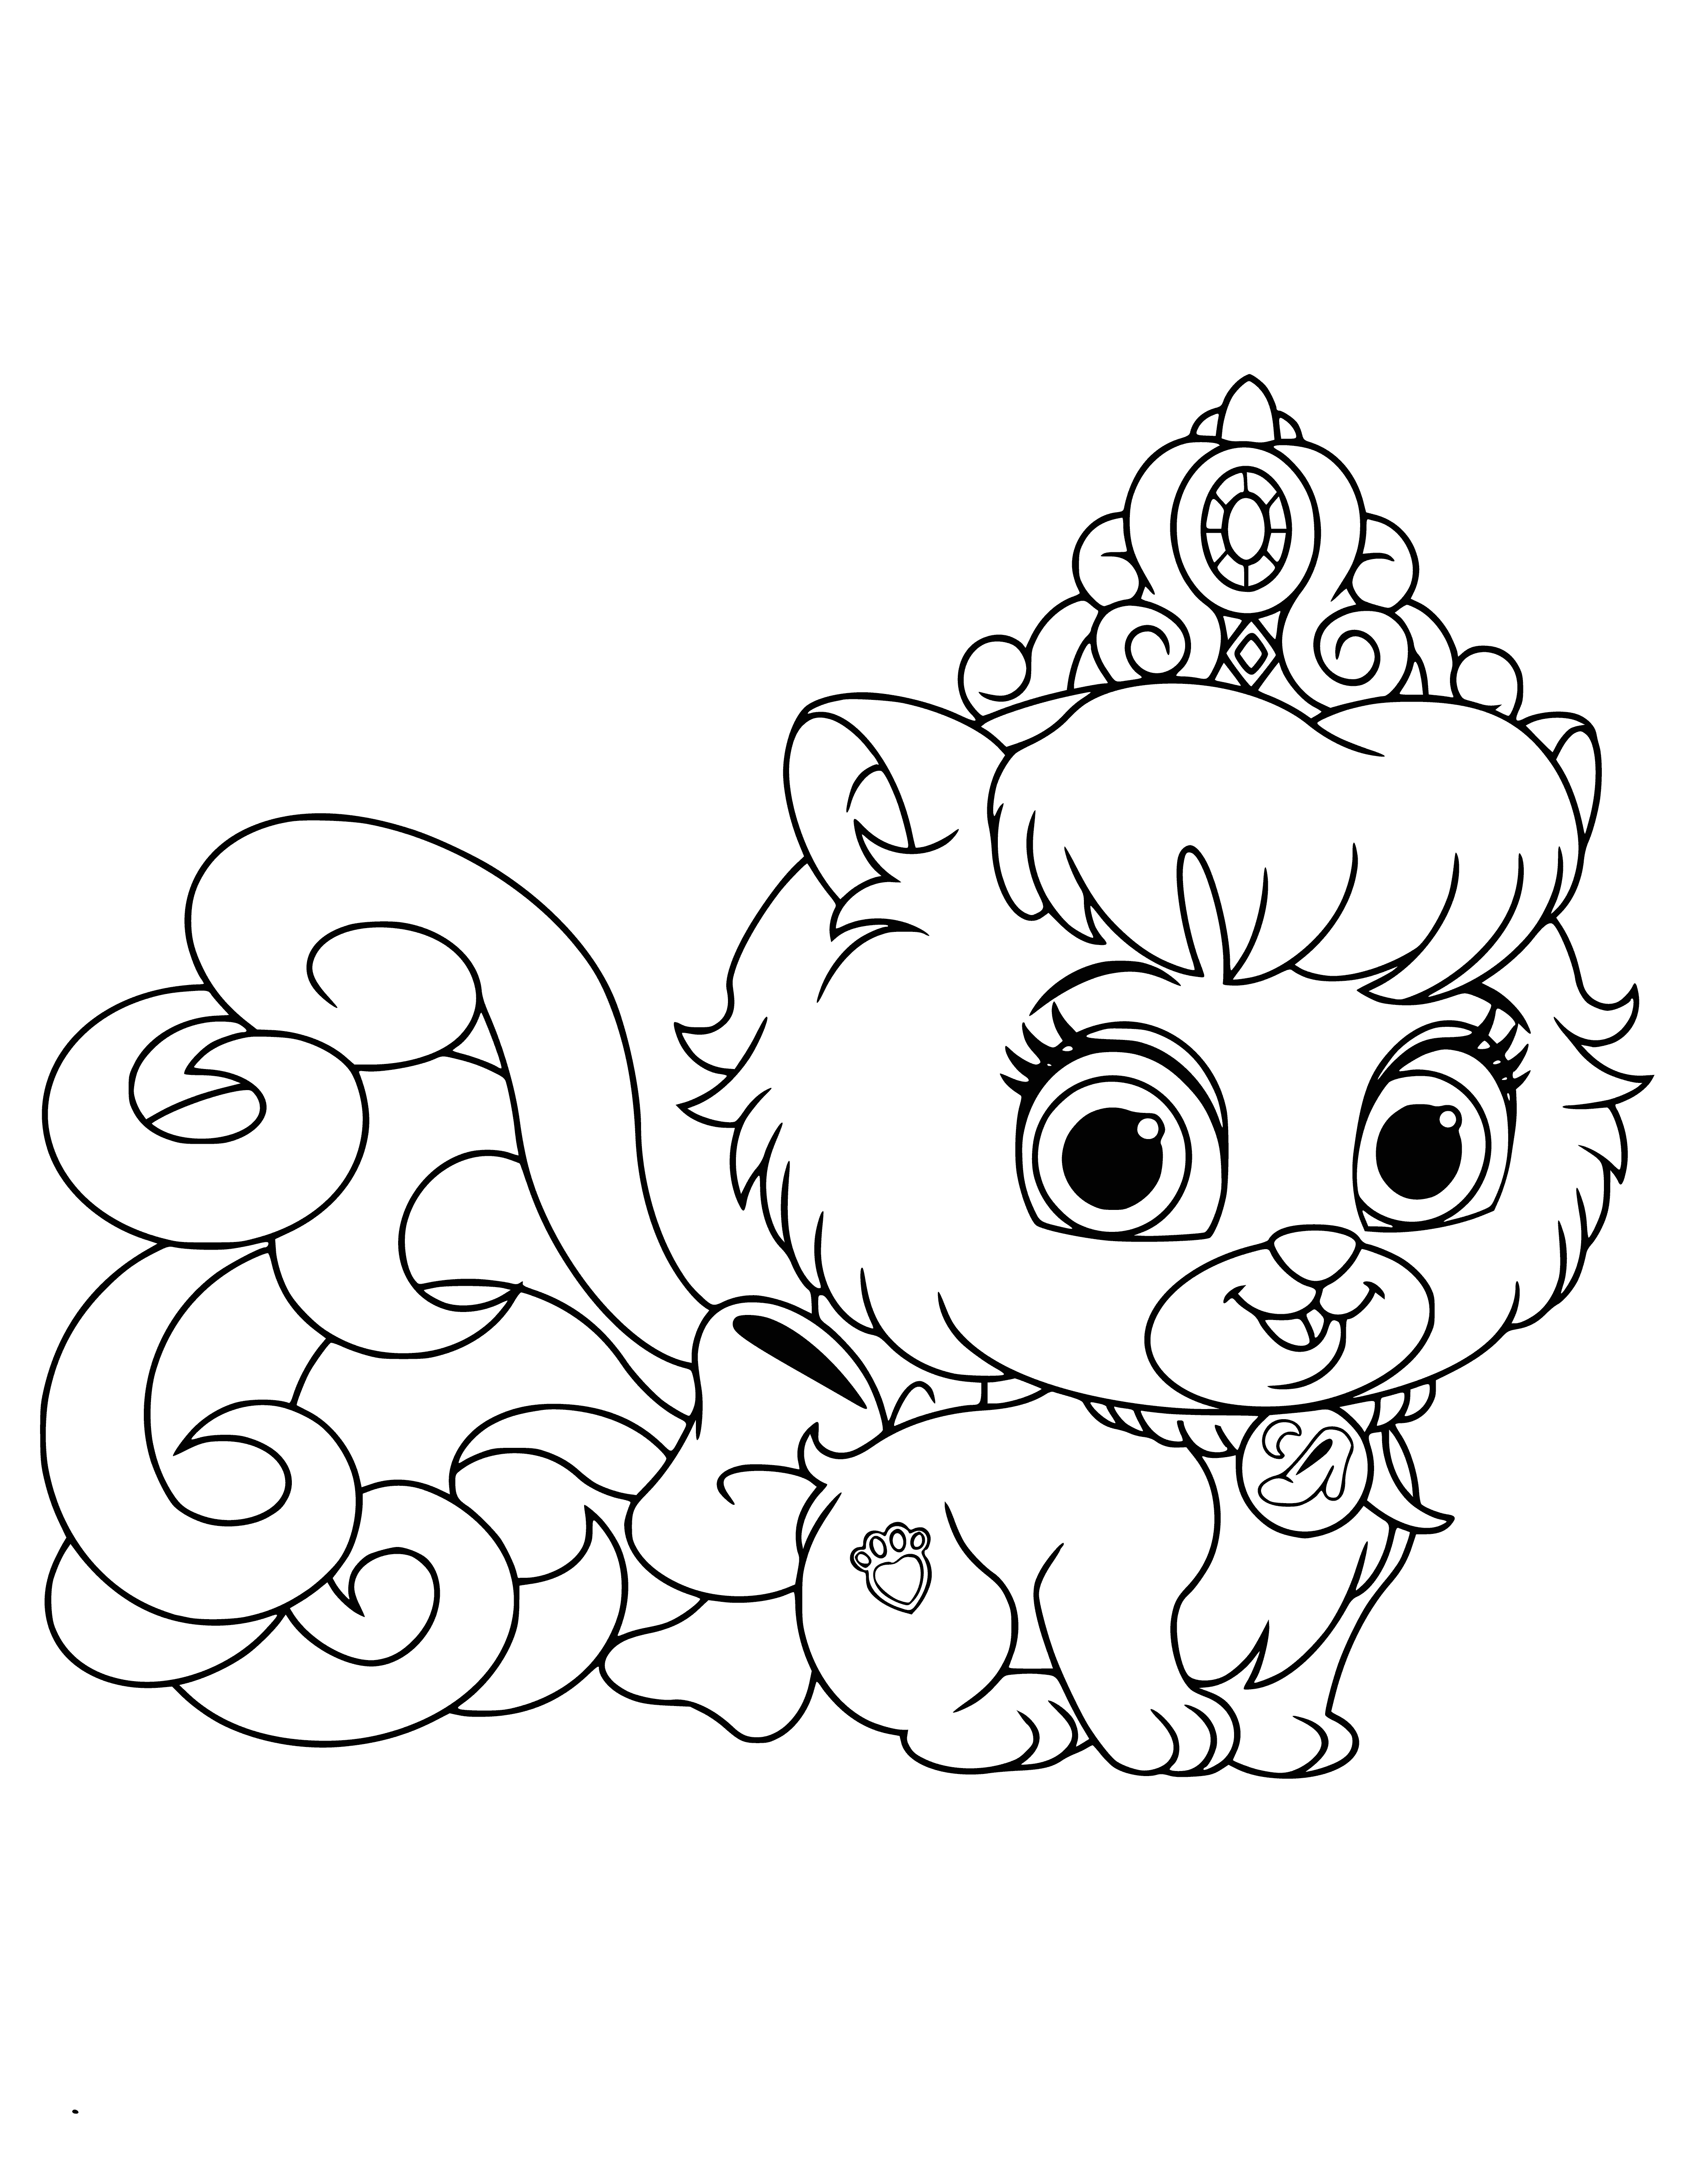 coloring page: Gray kitten with white paws perched atop glass slipper, gazing with large, expressive green eyes.